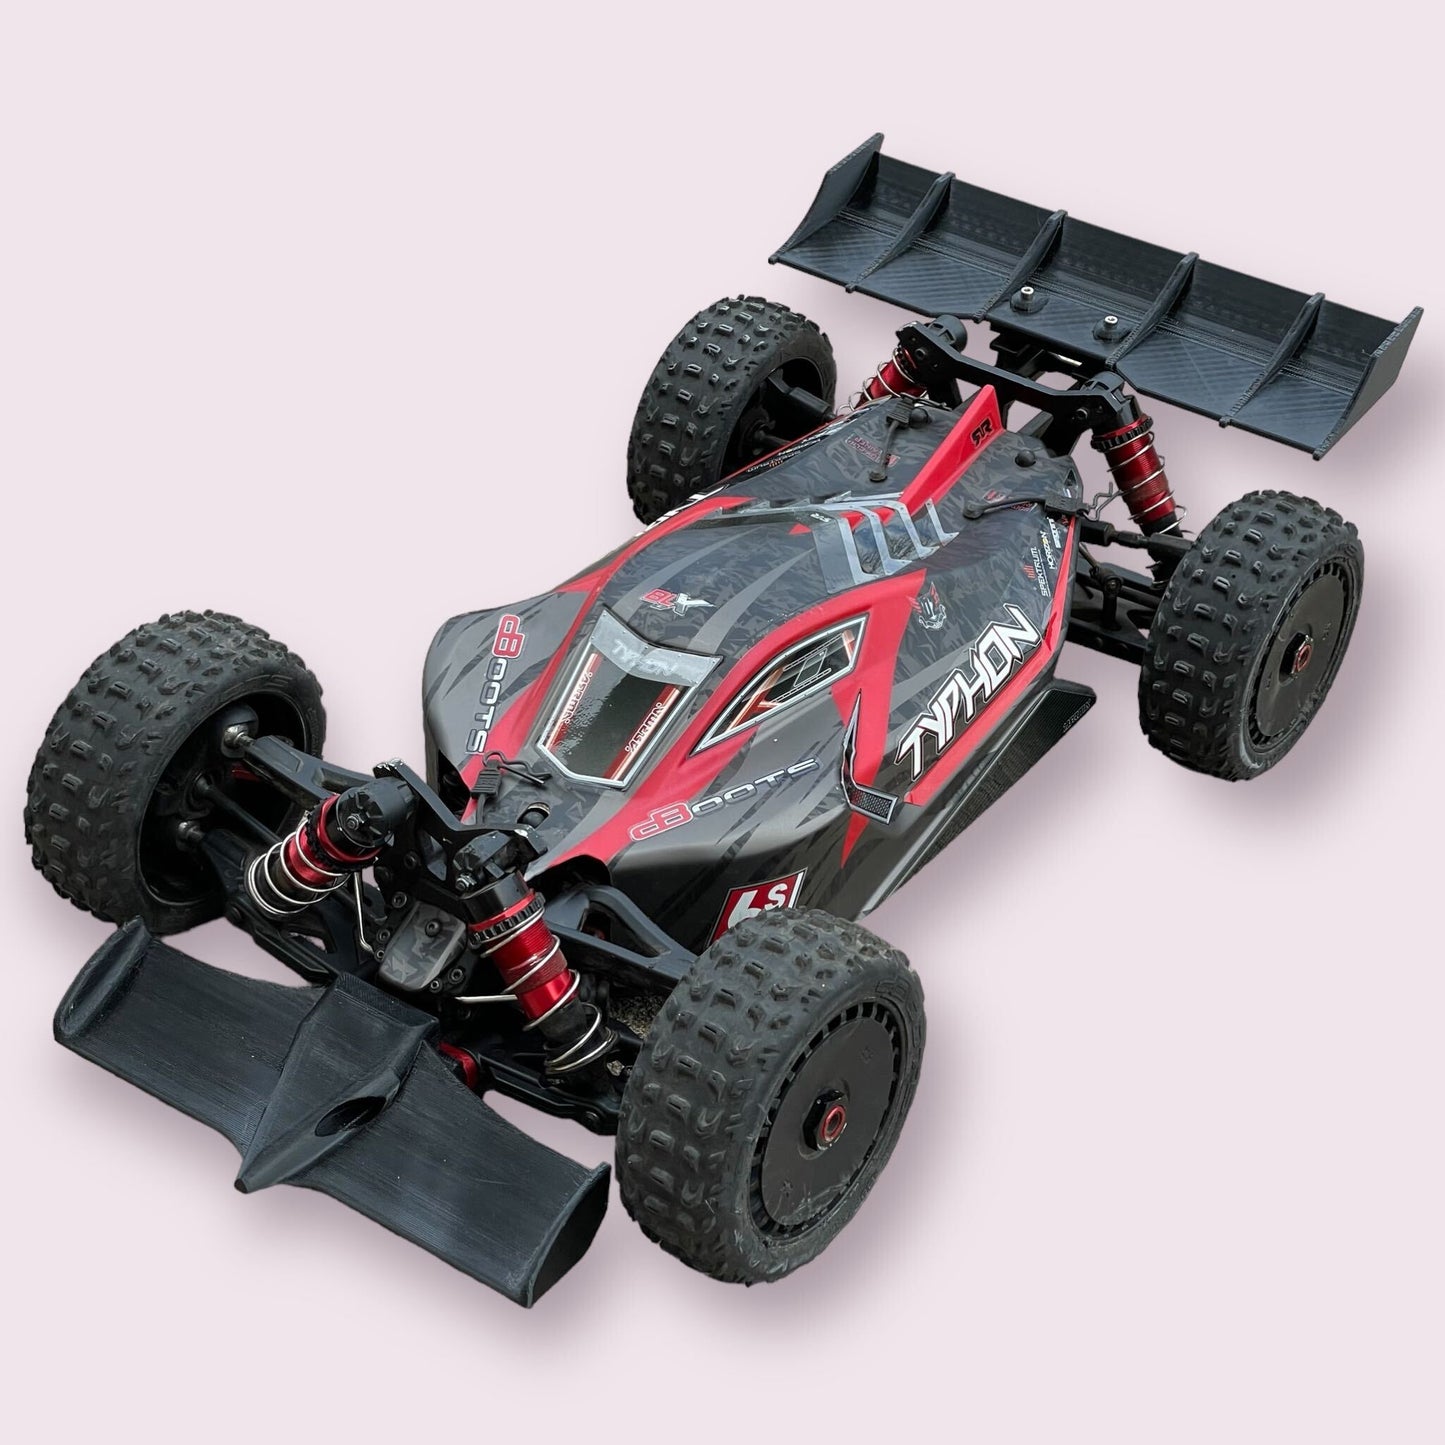 Formula F1 Aero Style Front & Rear Wing For Arrma Typhon 6s BLX